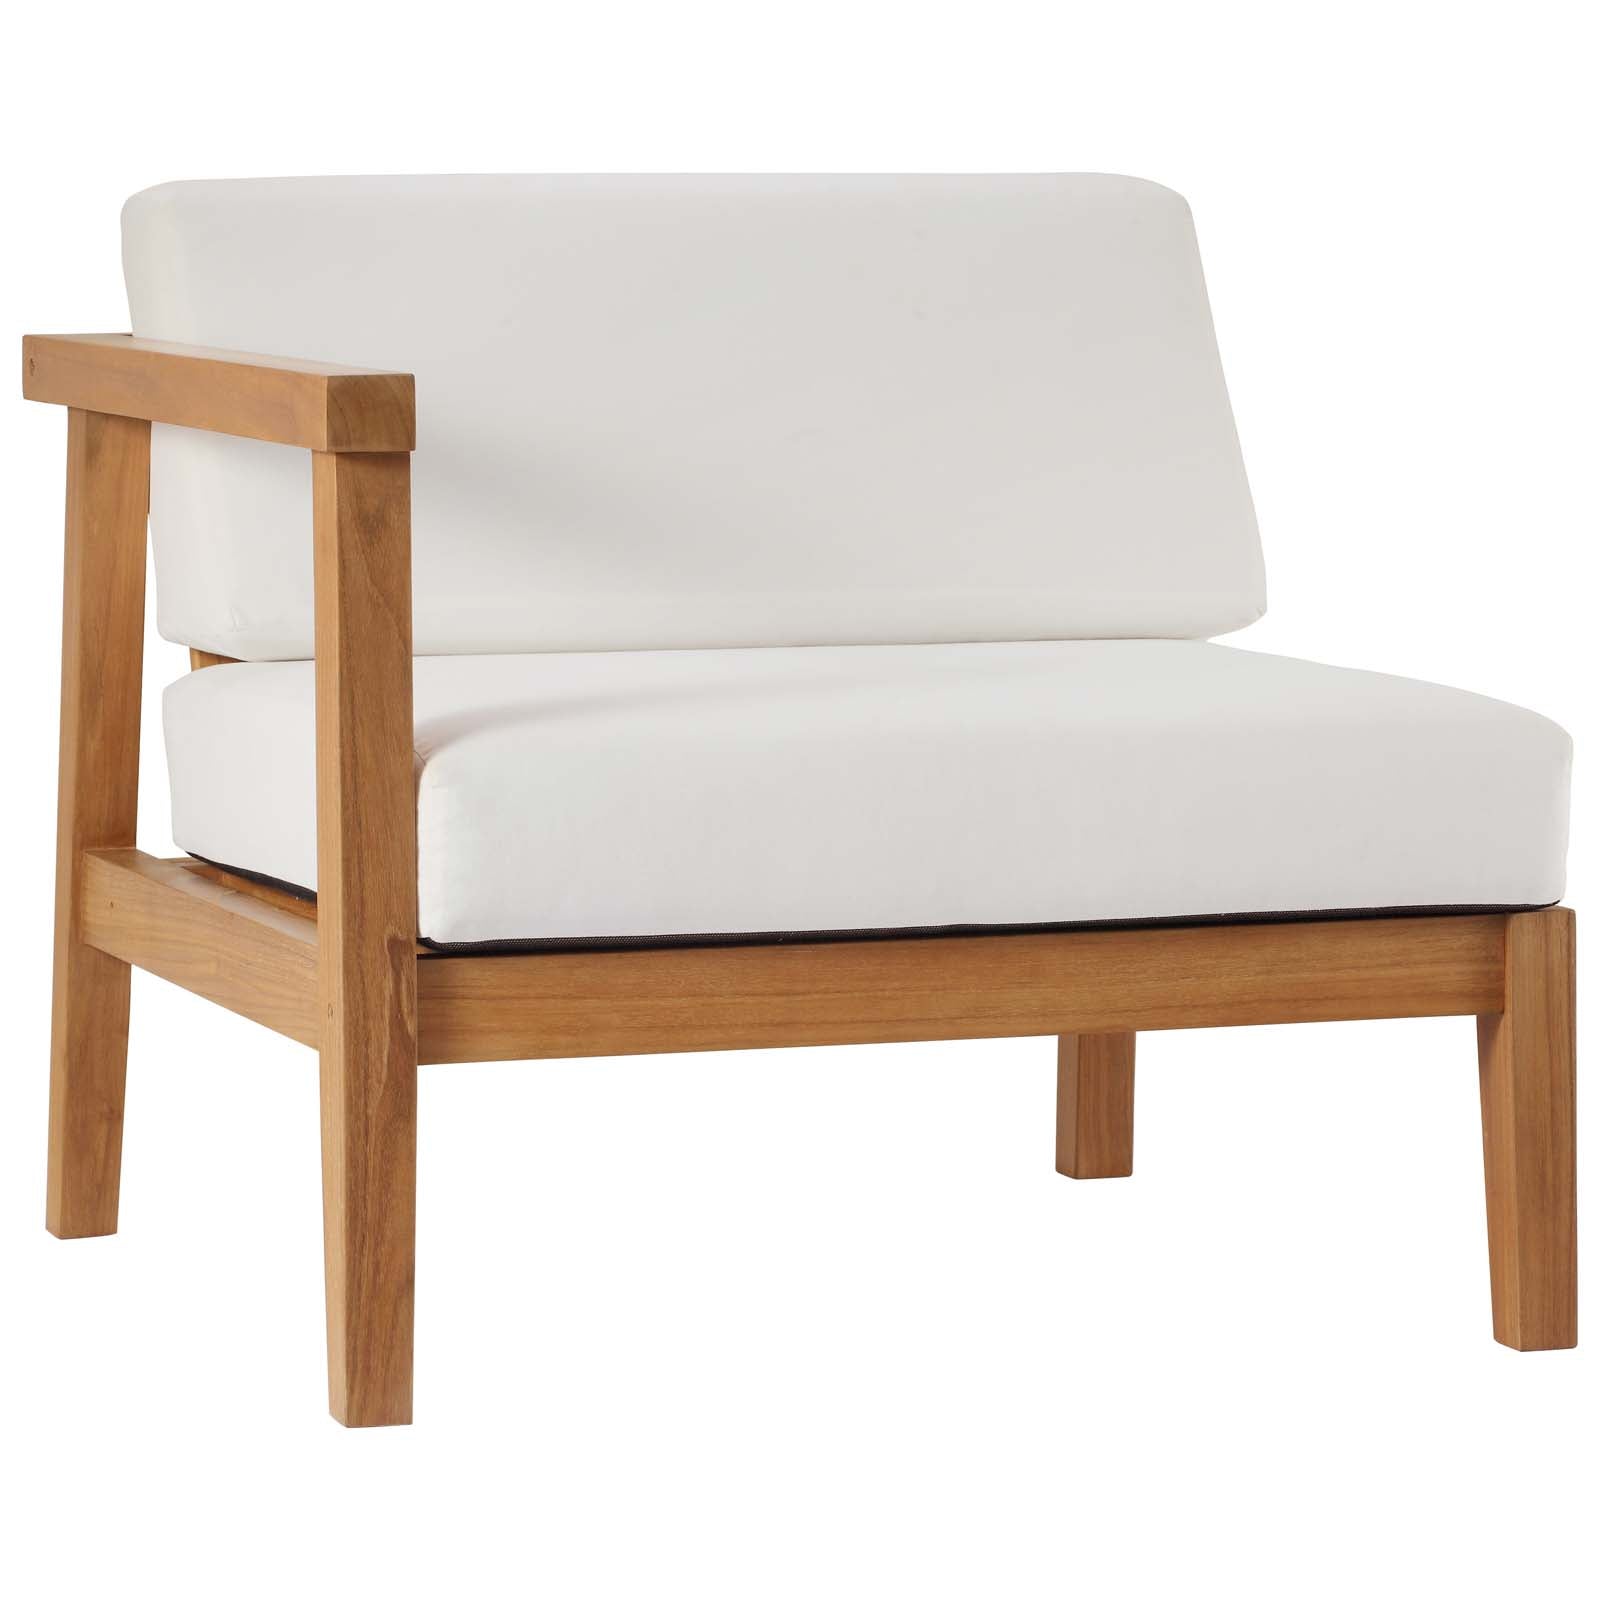 Bayport Outdoor Patio Teak Wood Left-Arm Chair-Outdoor Arm Chair-Modway-Wall2Wall Furnishings